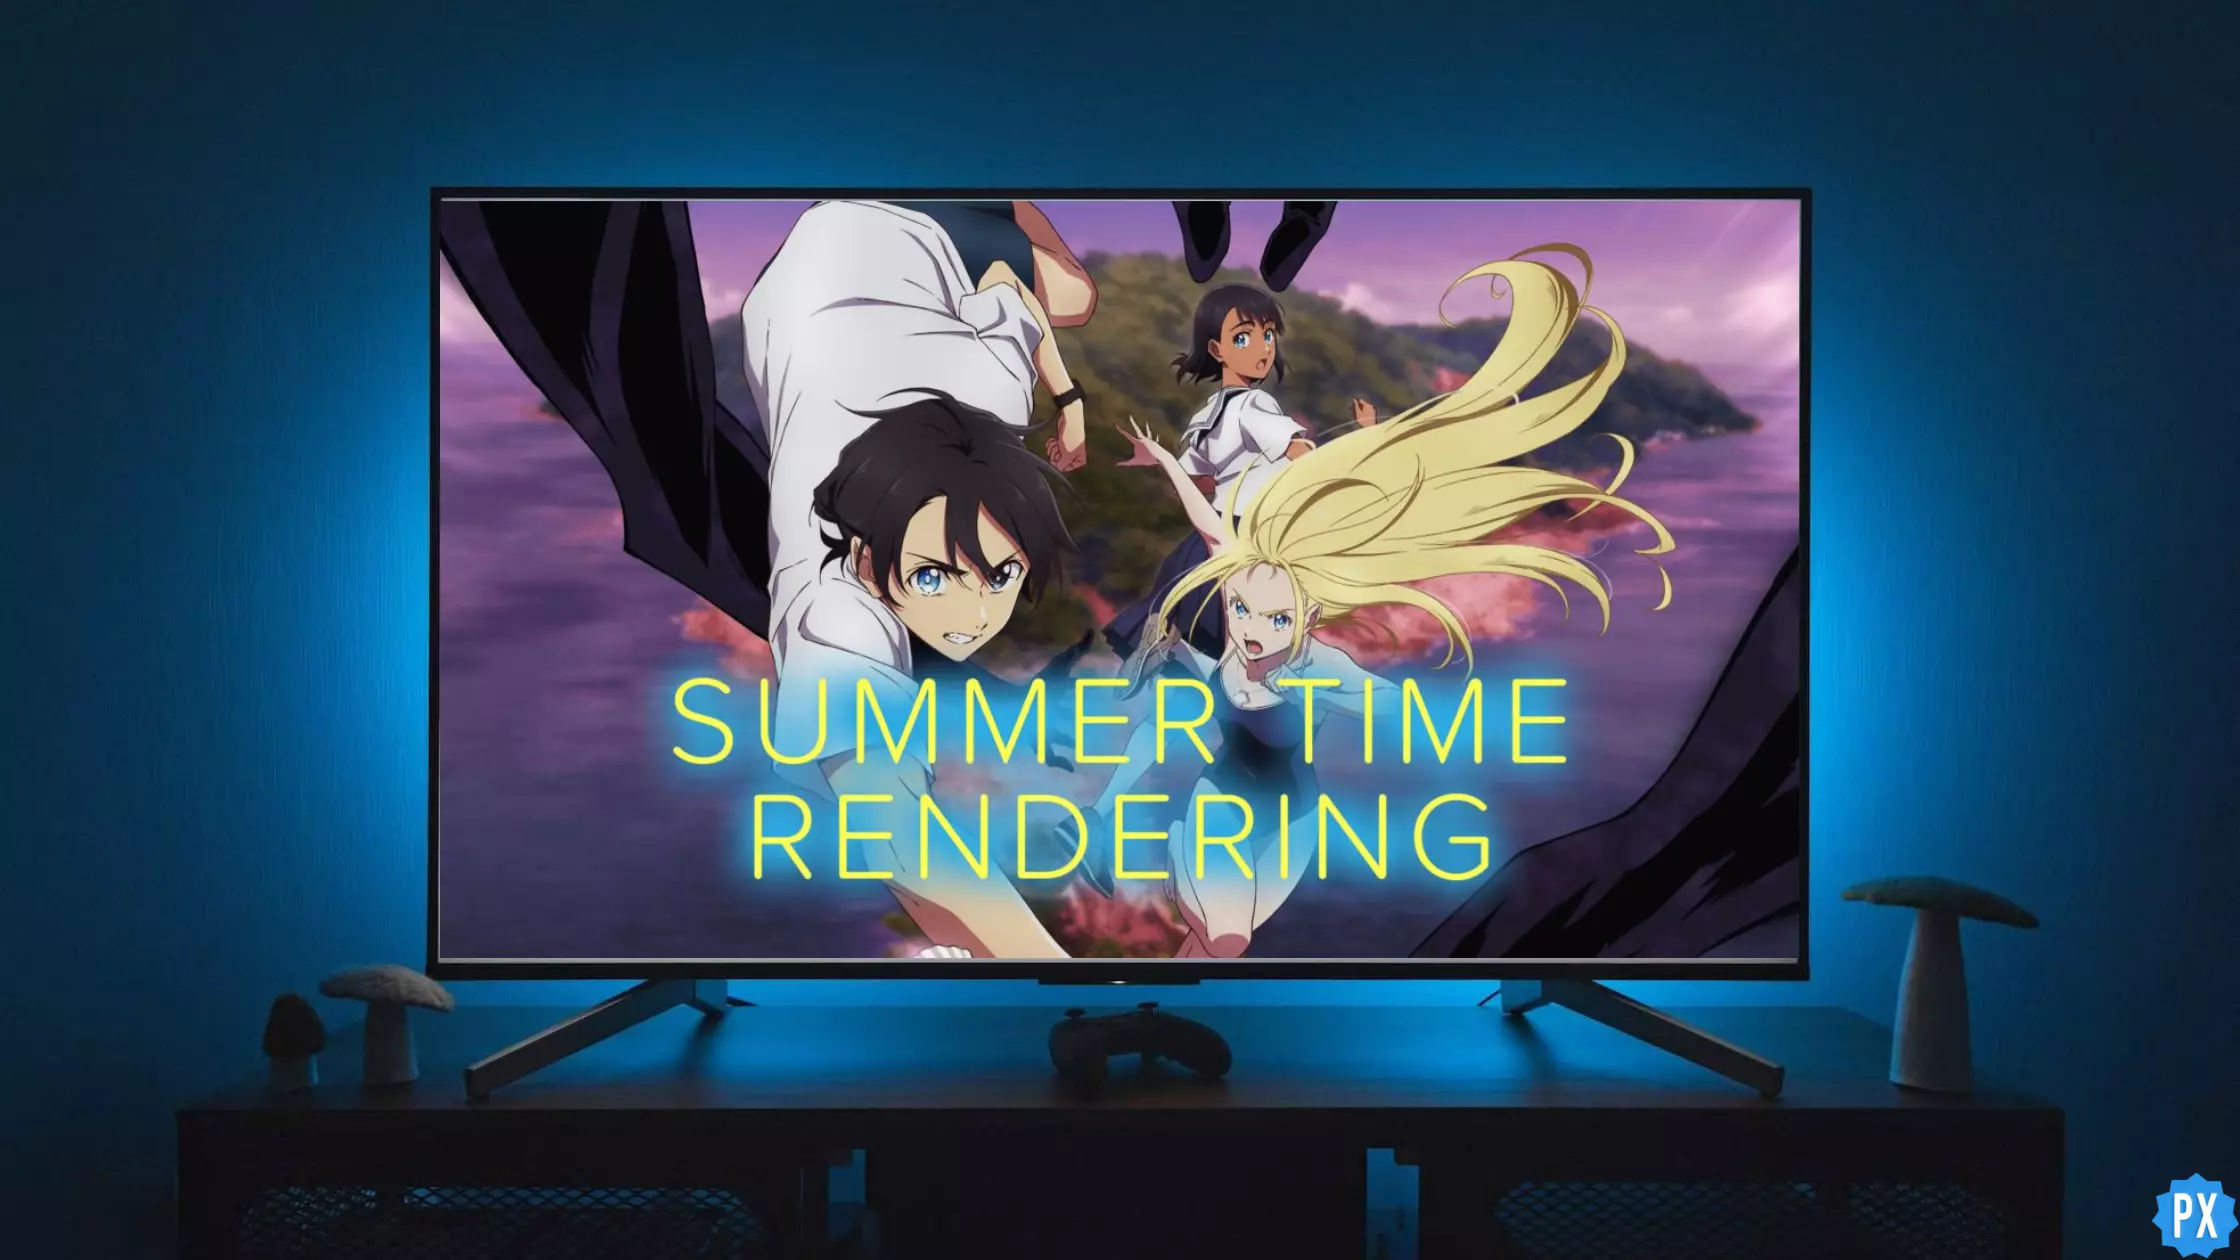 TV Time - Summer Time Rendering (TVShow Time)